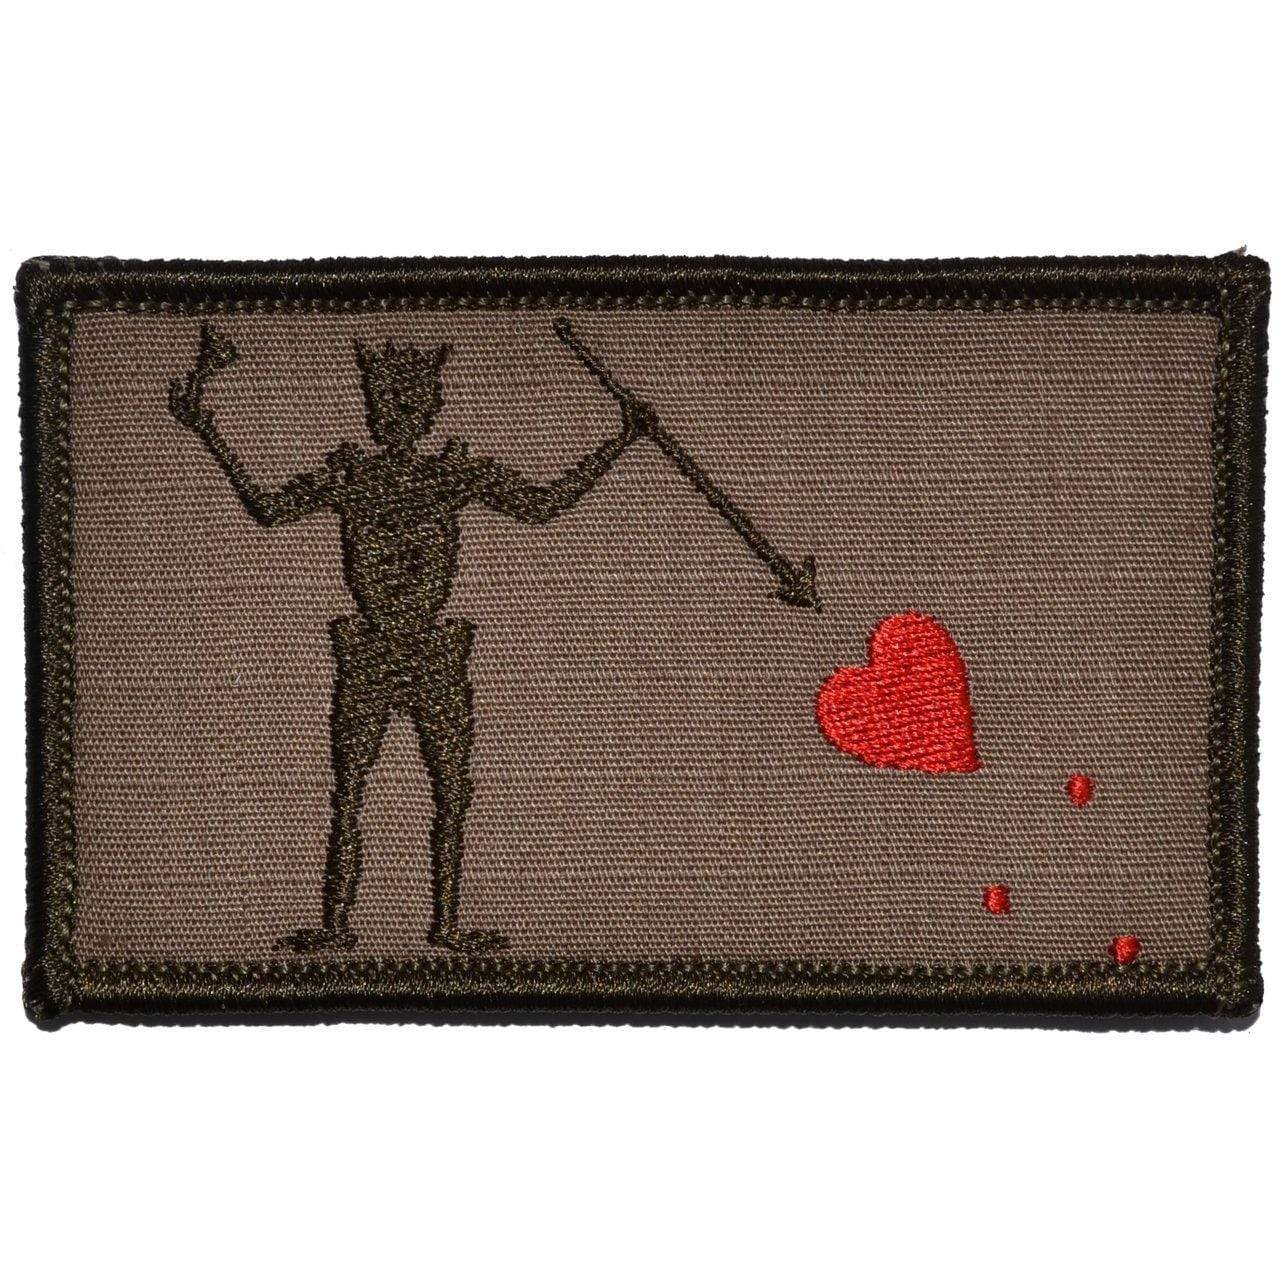 Tactical Gear Junkie Patches Coyote Brown Edward Teach Blackbeard Pirate Flag - 3.75x2.25 Patch